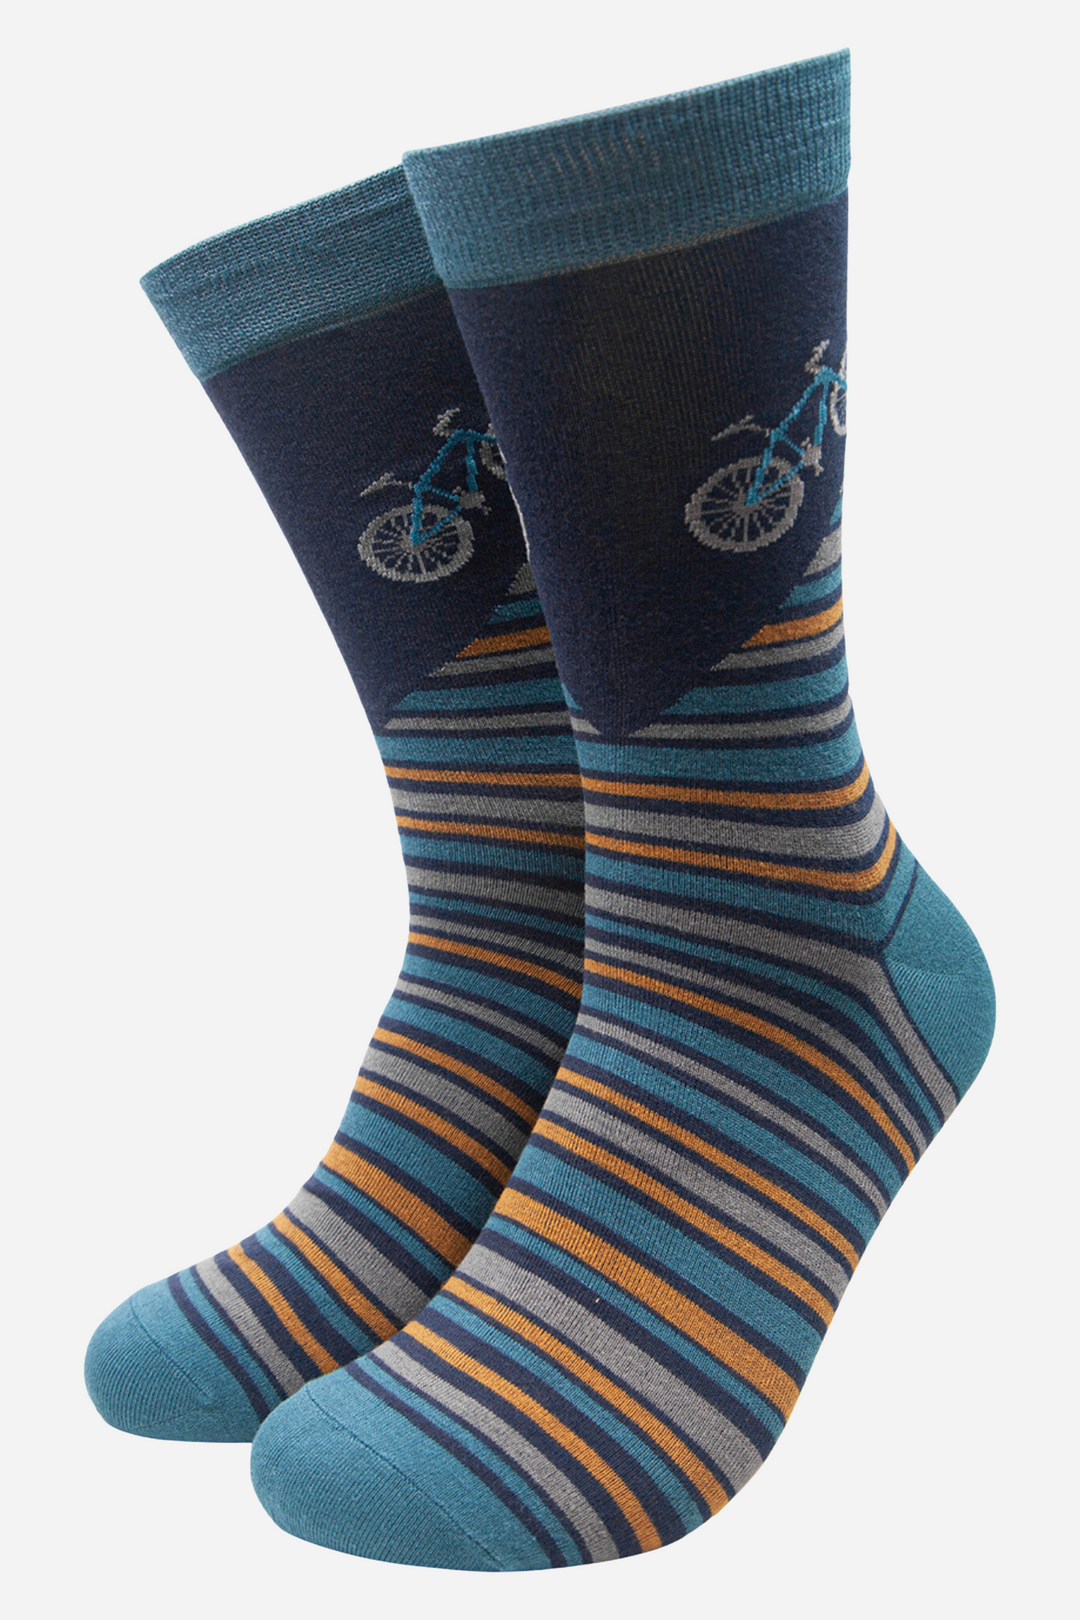 blue and yellow striped socks with a large mountain bike motif on the ankle